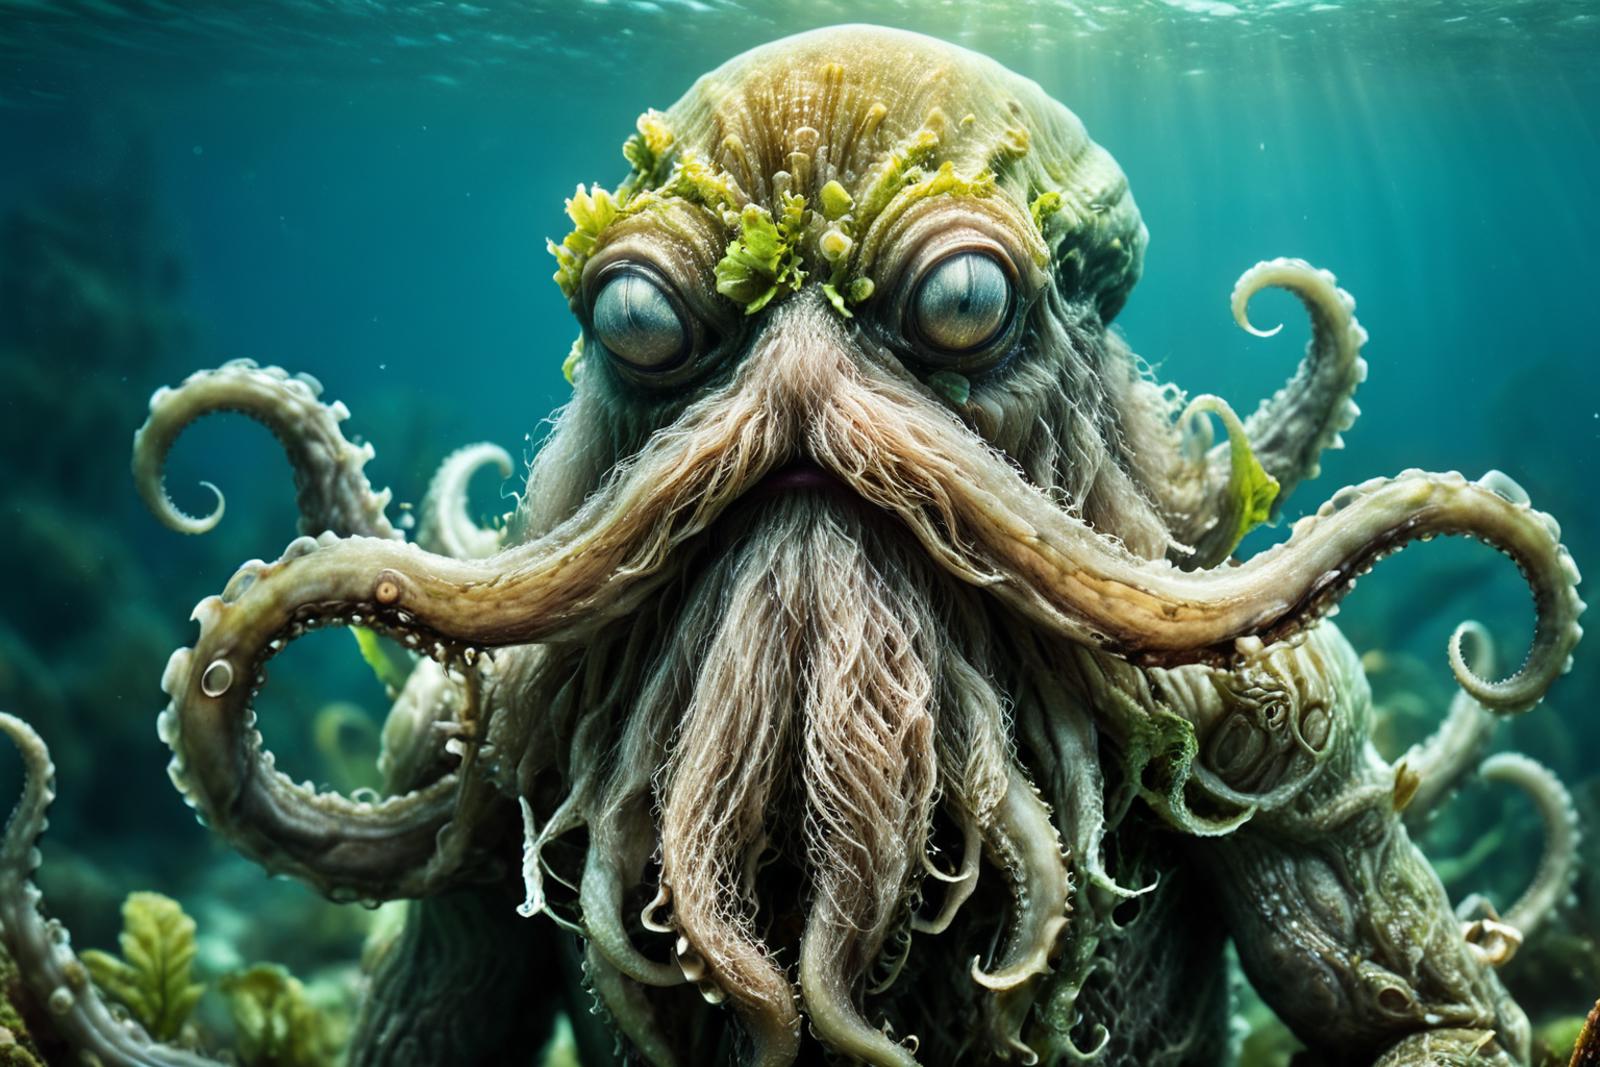 An Underwater Creature with Multiple Eyes, Tentacles, and Seaweed on its Head.